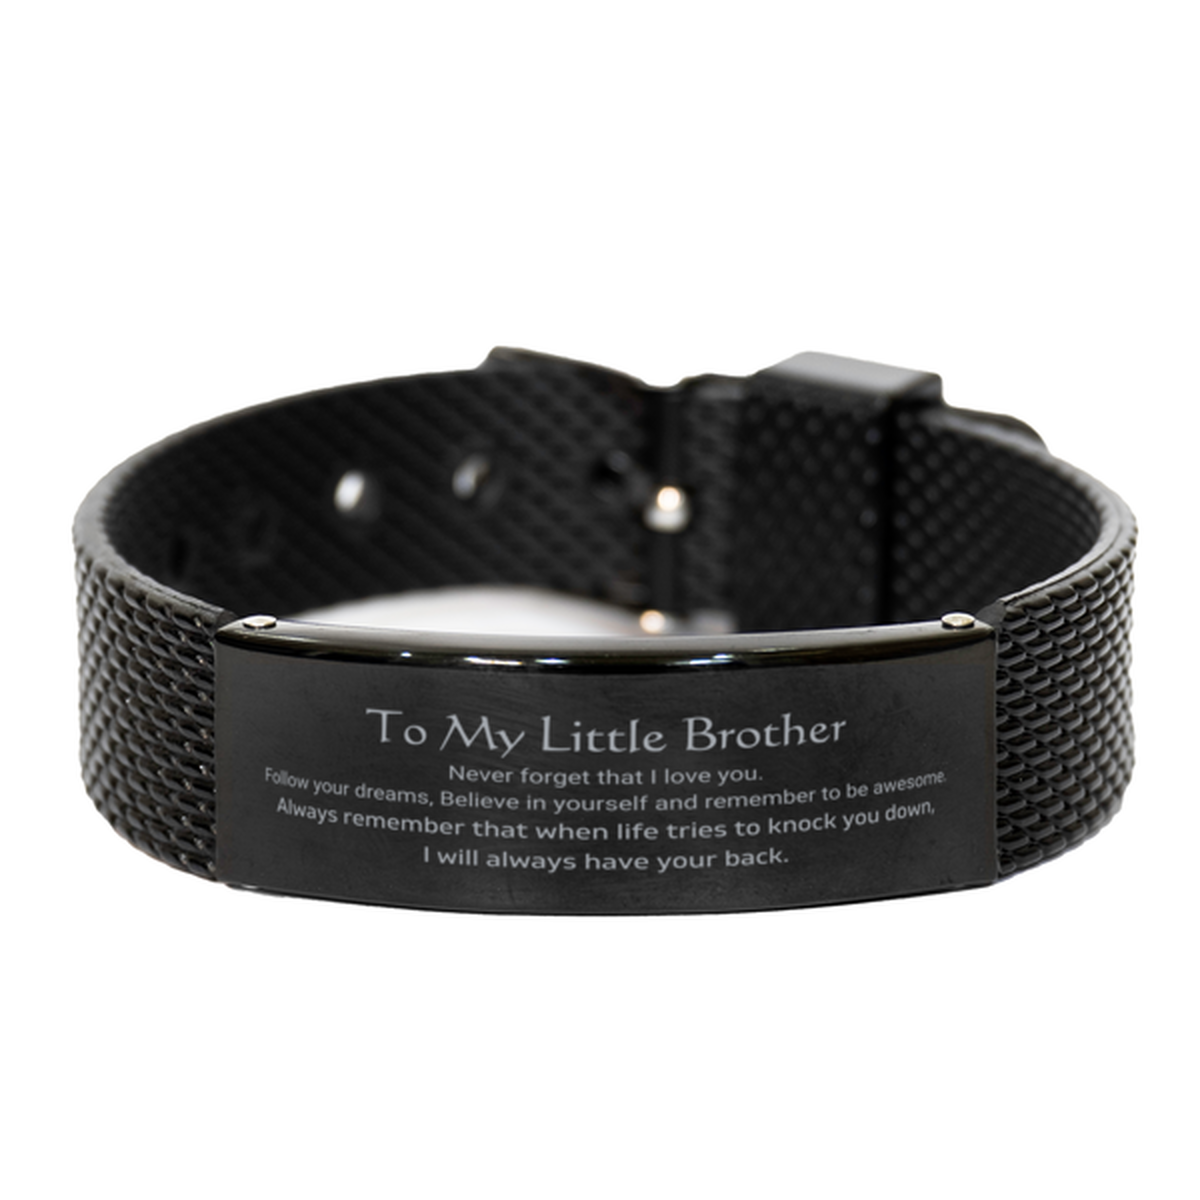 Inspirational Gifts for Little Brother, Follow your dreams, Believe in yourself, Little Brother Black Shark Mesh Bracelet, Birthday Christmas Unique Gifts For Little Brother